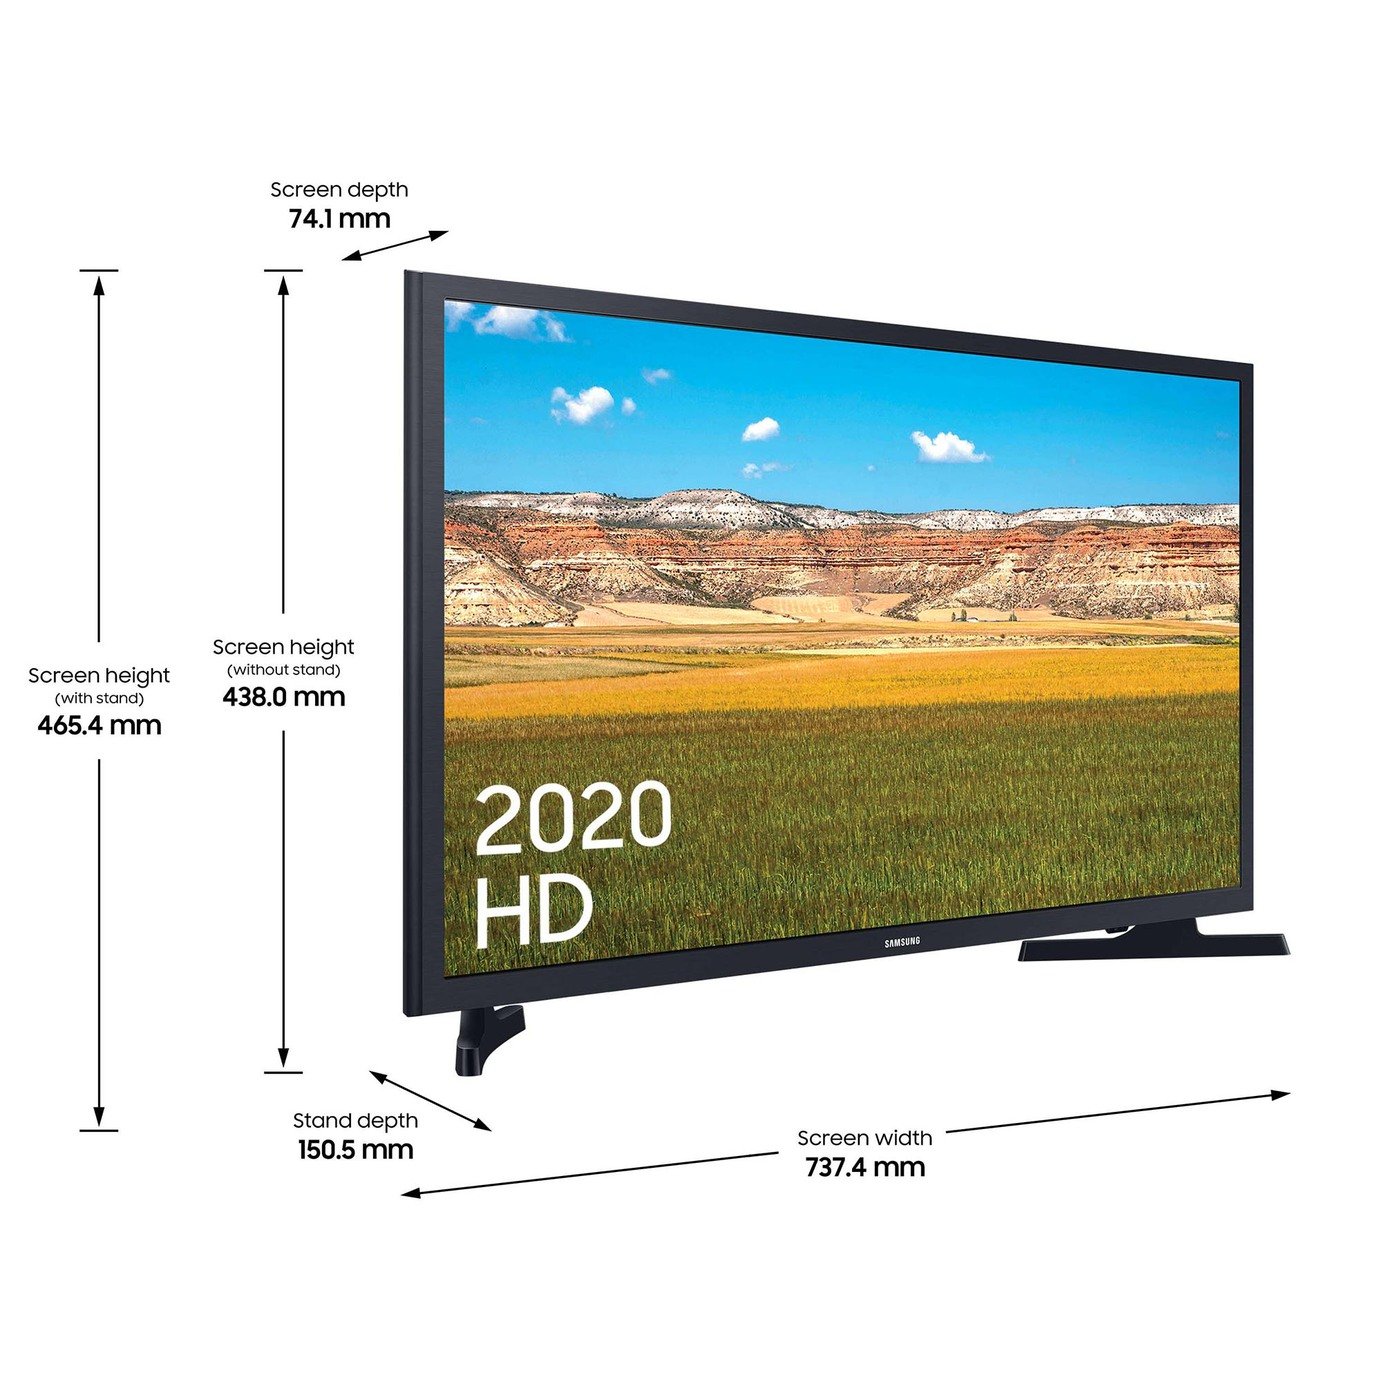 Samsung 32 Inch UE32T4307 Smart HD Ready LED TV with HDR Review